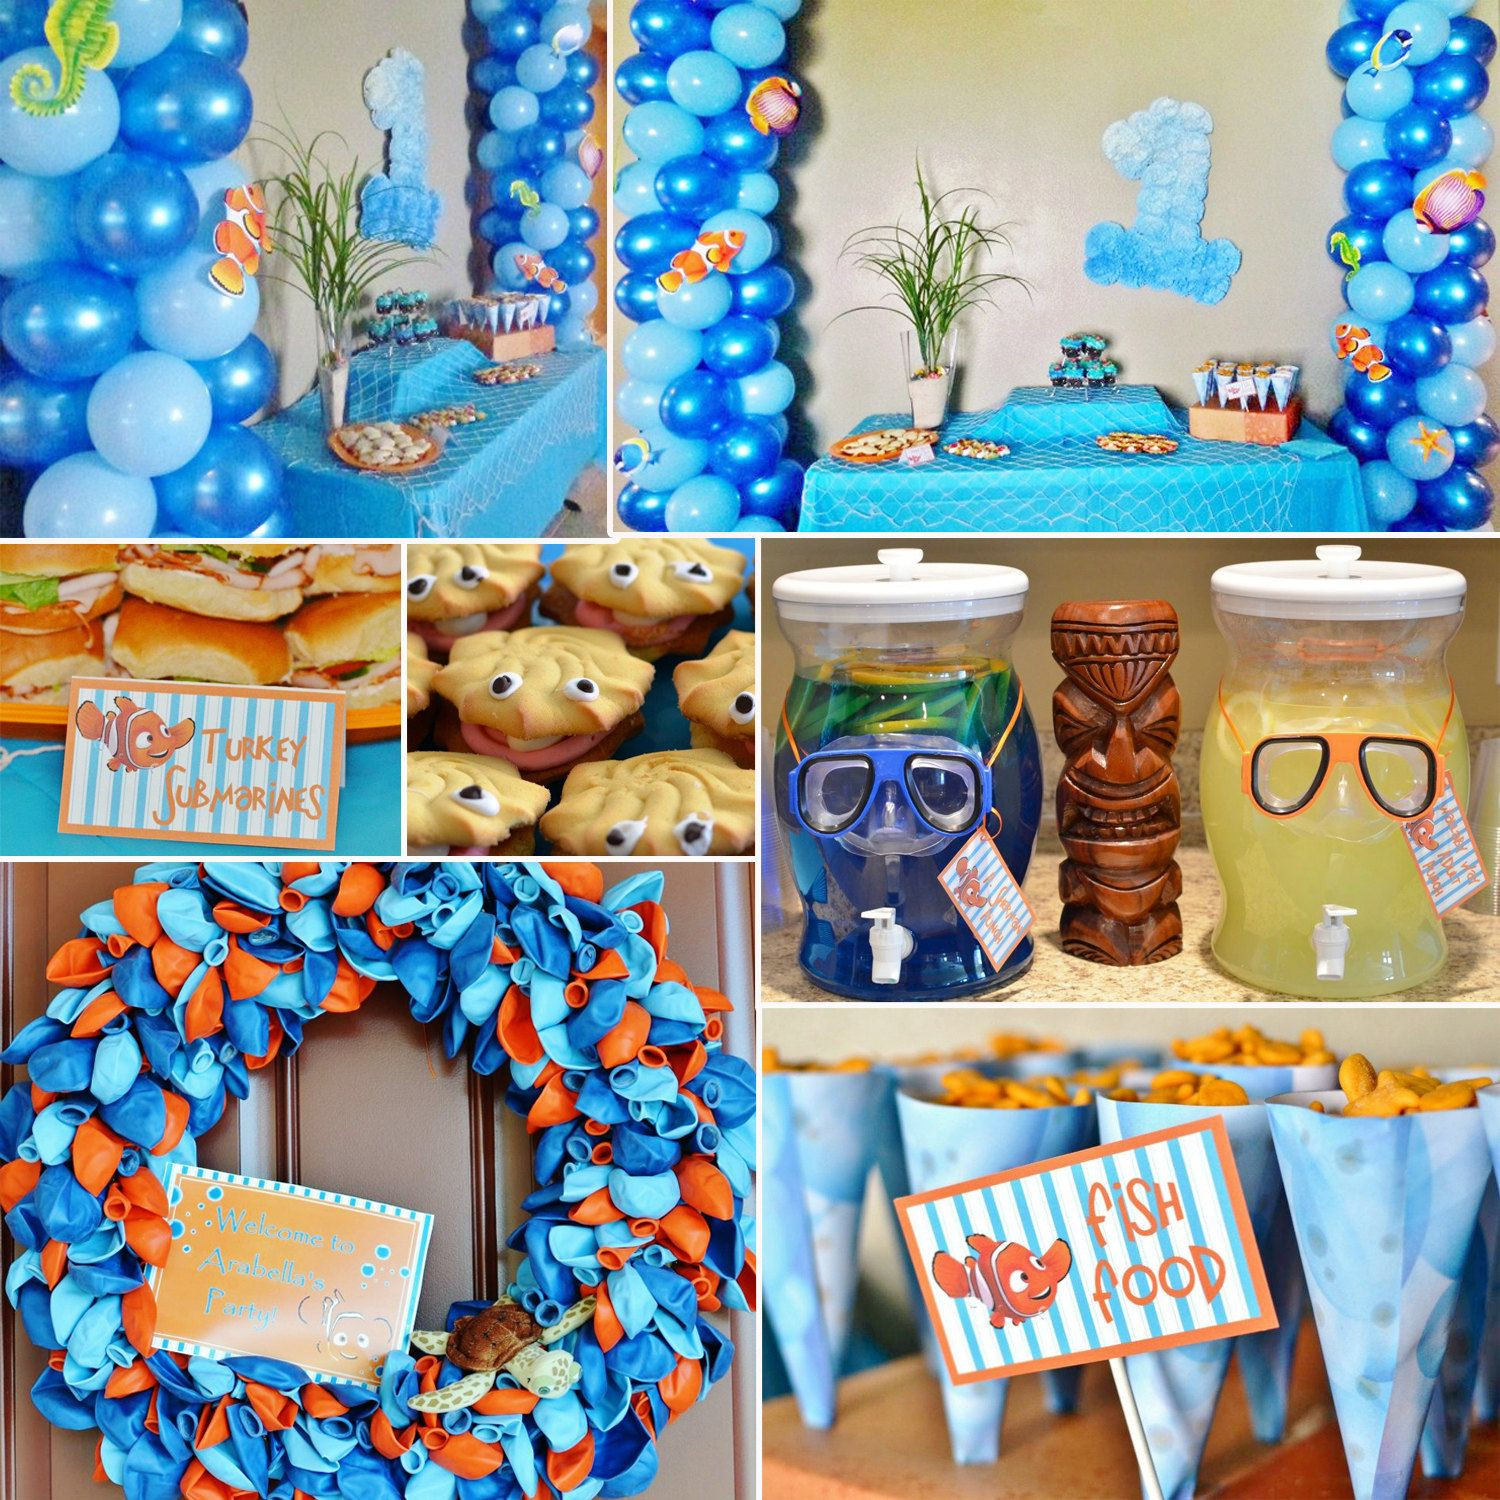 Finding Nemo Birthday Decorations
 DIY Digital Customized Finding Nemo Party Pack Bundle $45